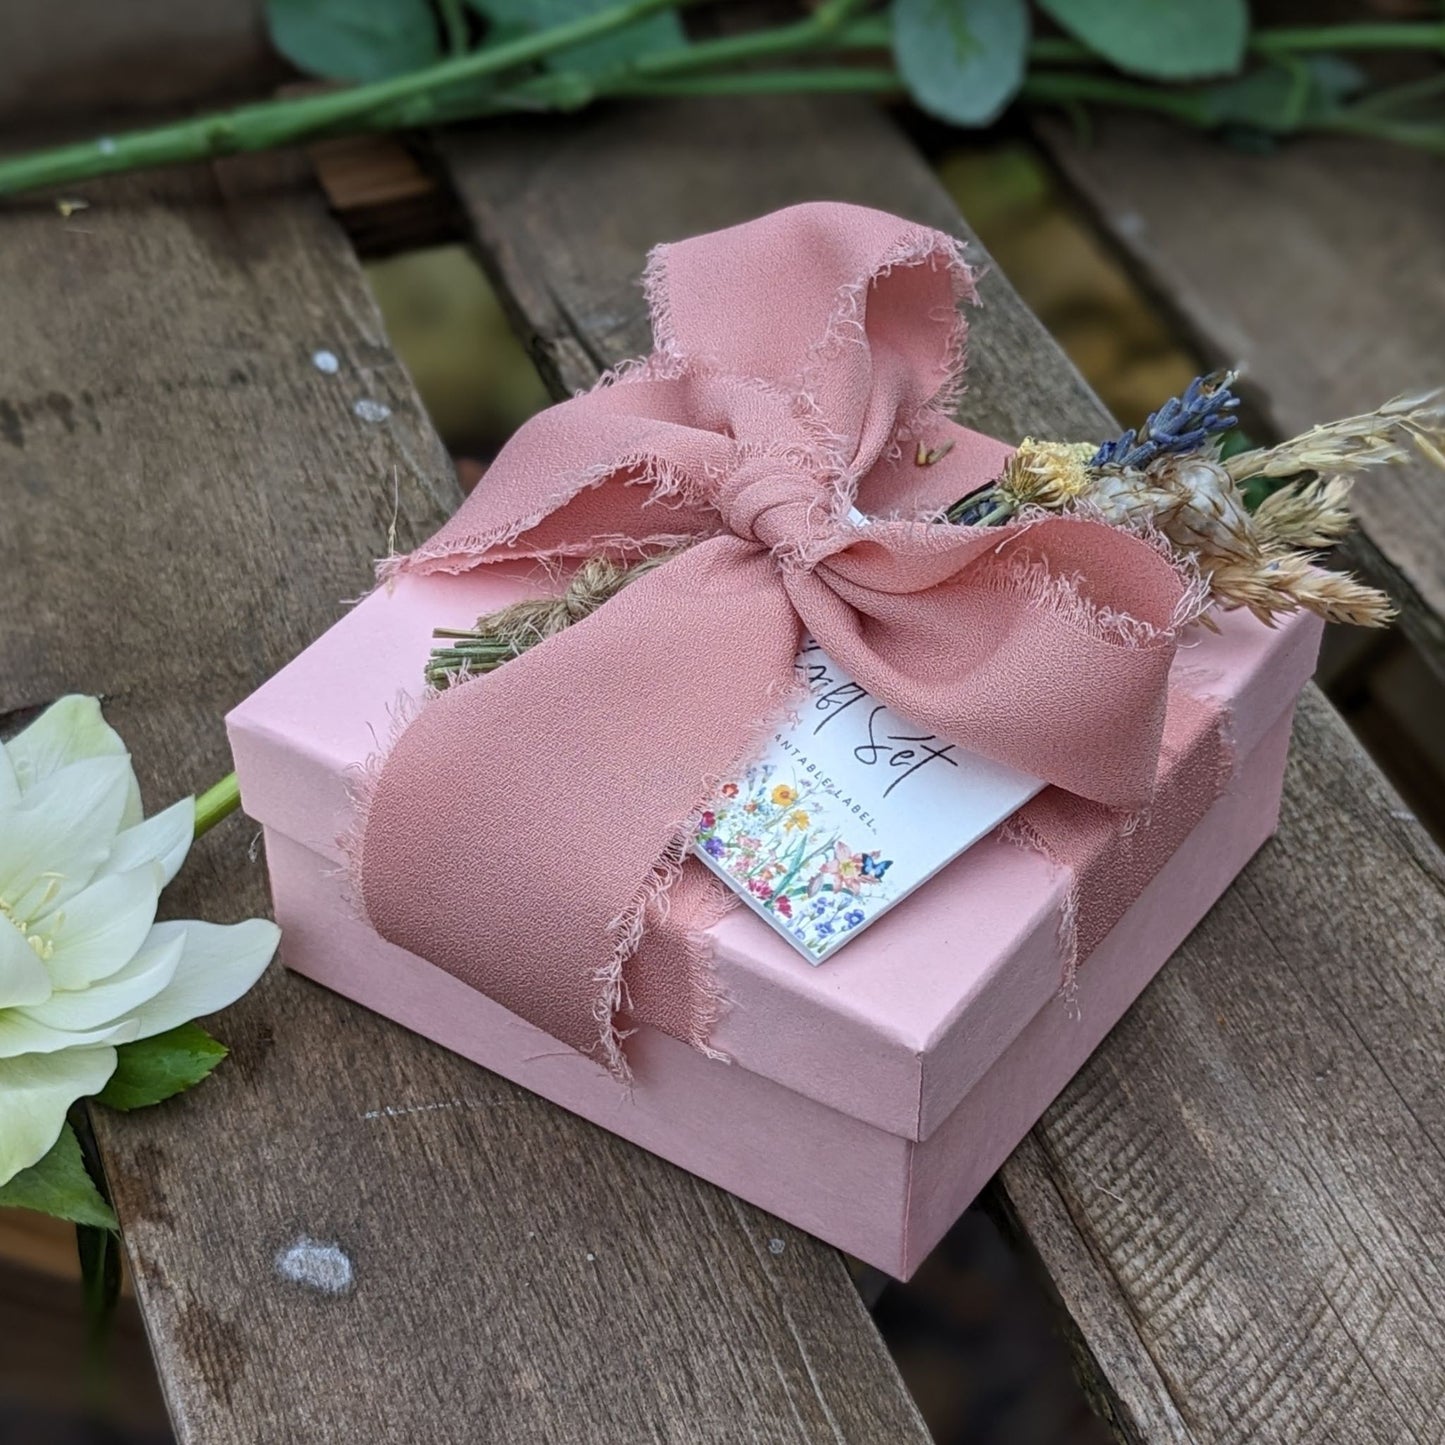 Soap Gift Set with handmade soap